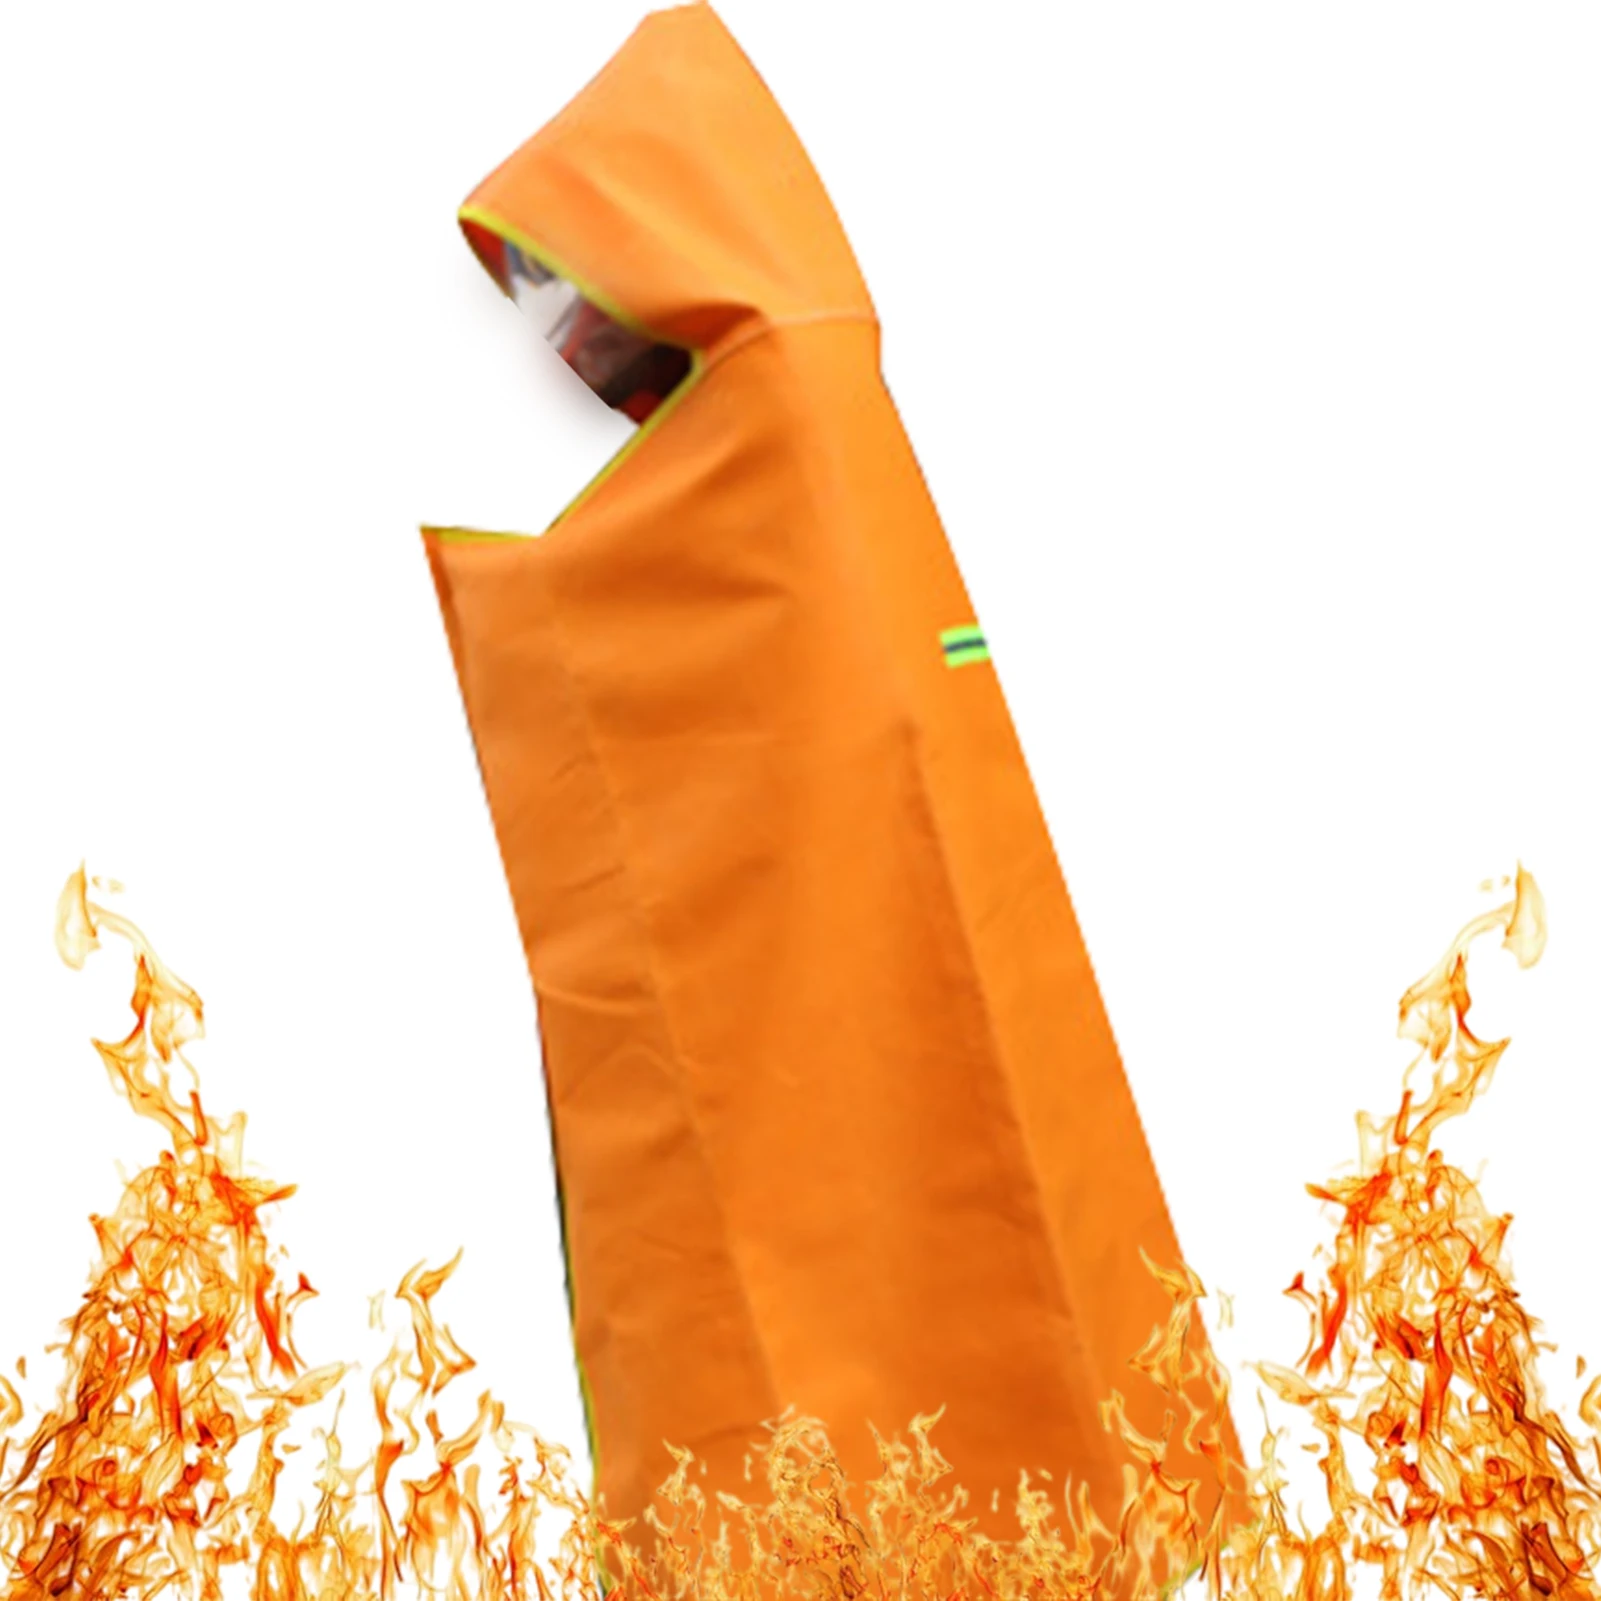 

Flame Retardant Cloak Flame Retardant Cloak Fire Retardant Cloak Emergency Survival Safety Home Escape Suit Full Body Protection